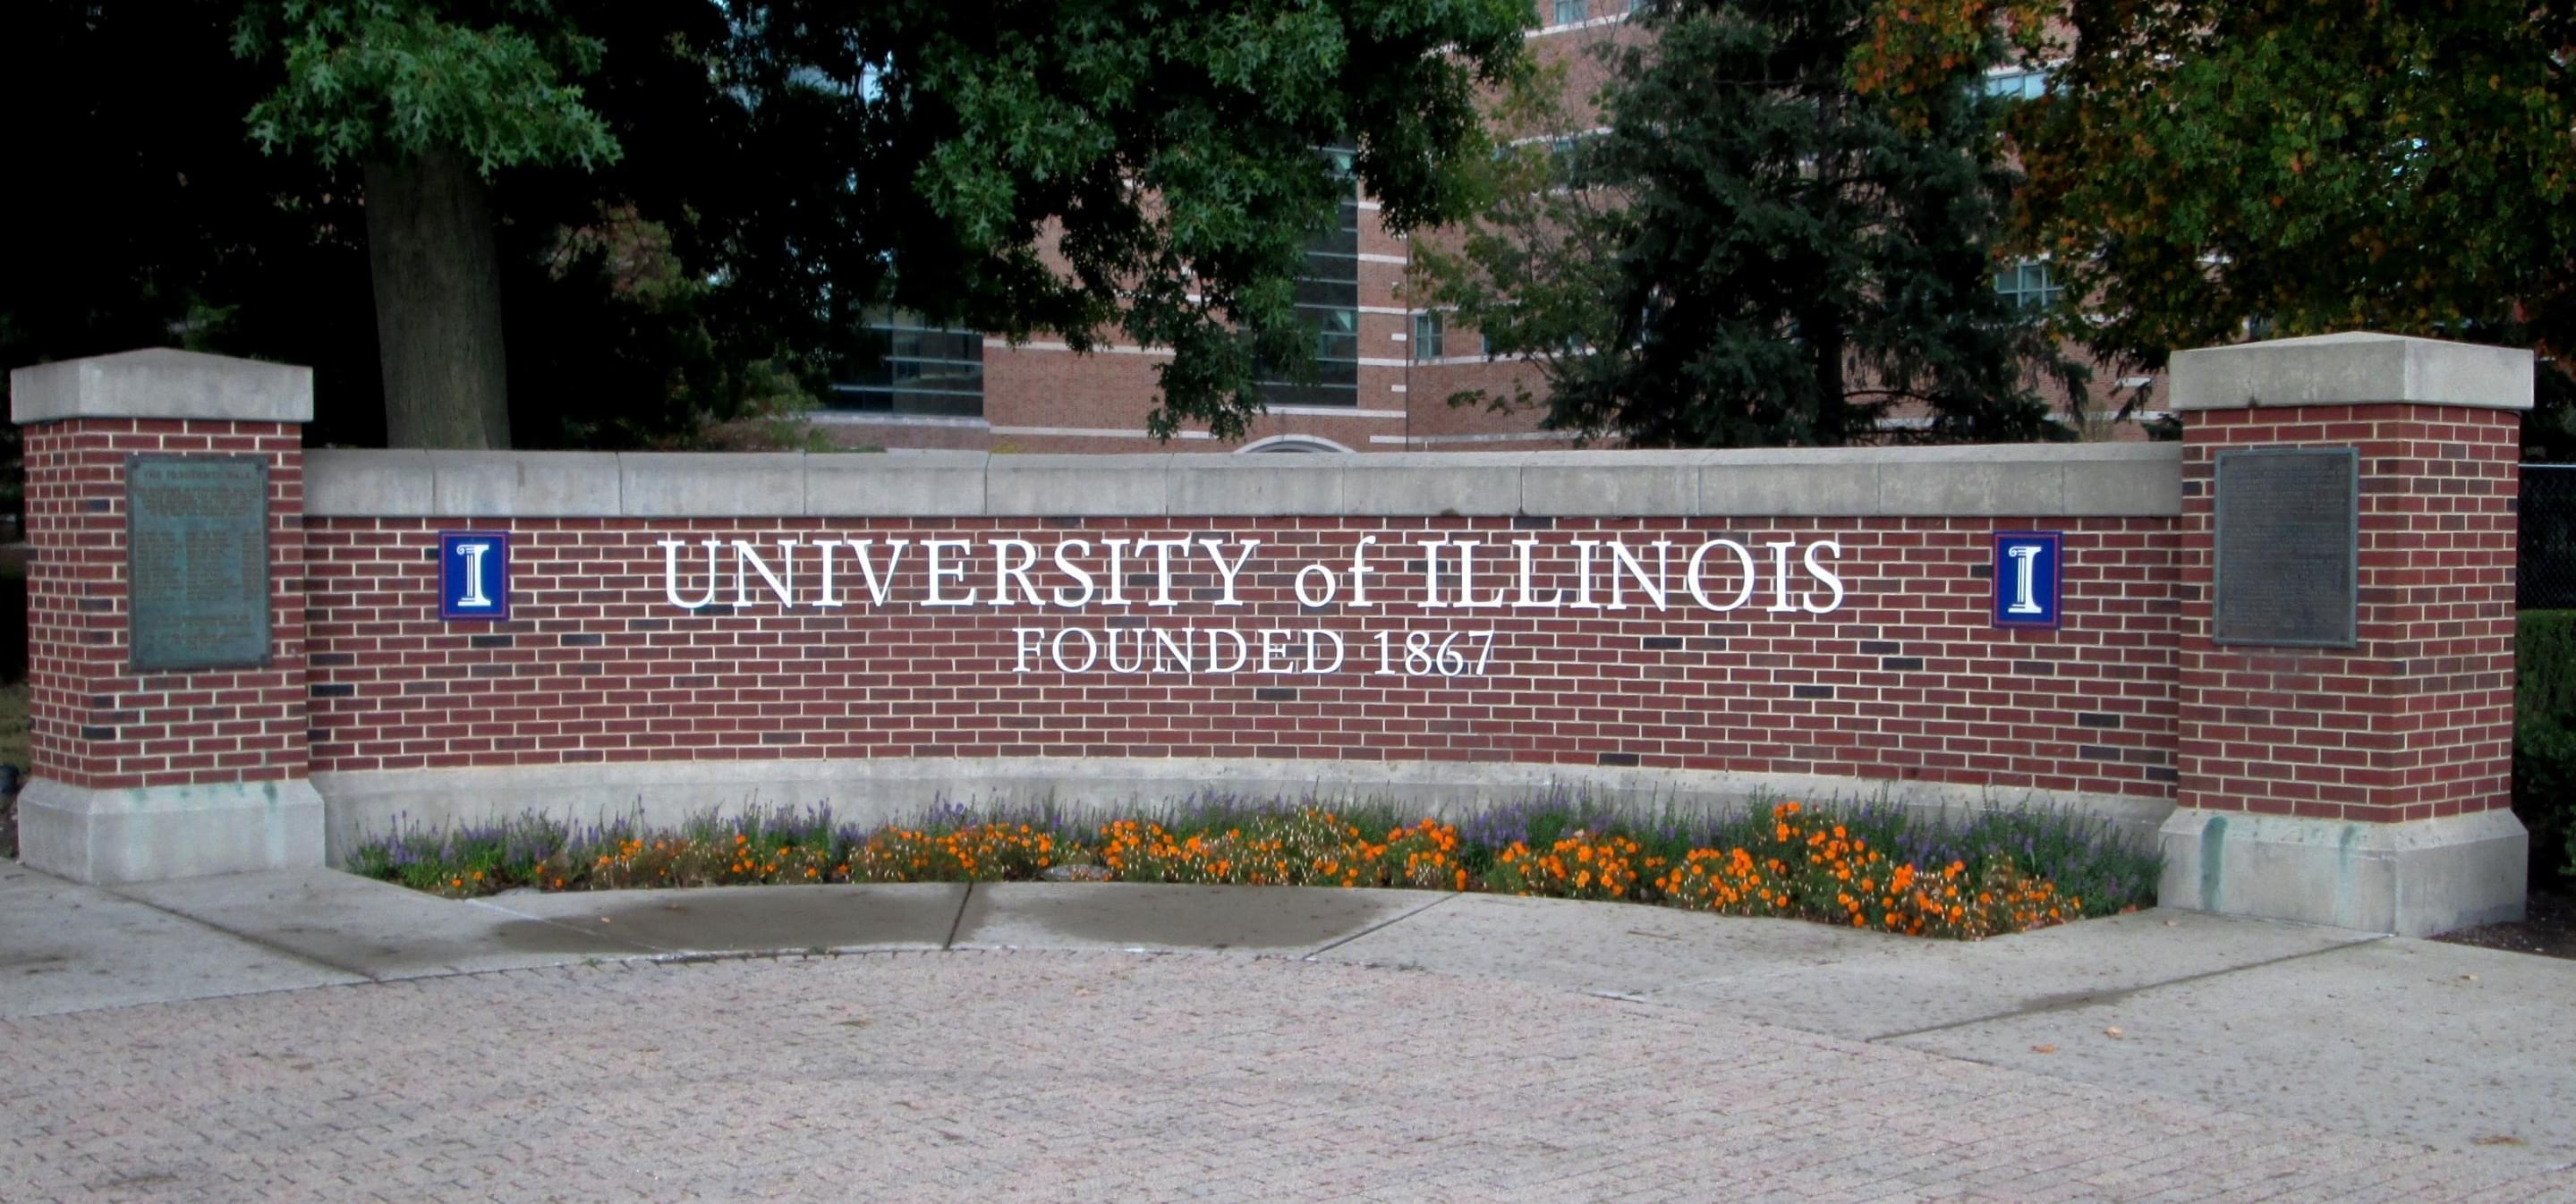 Campus marker for the University of Illinois.